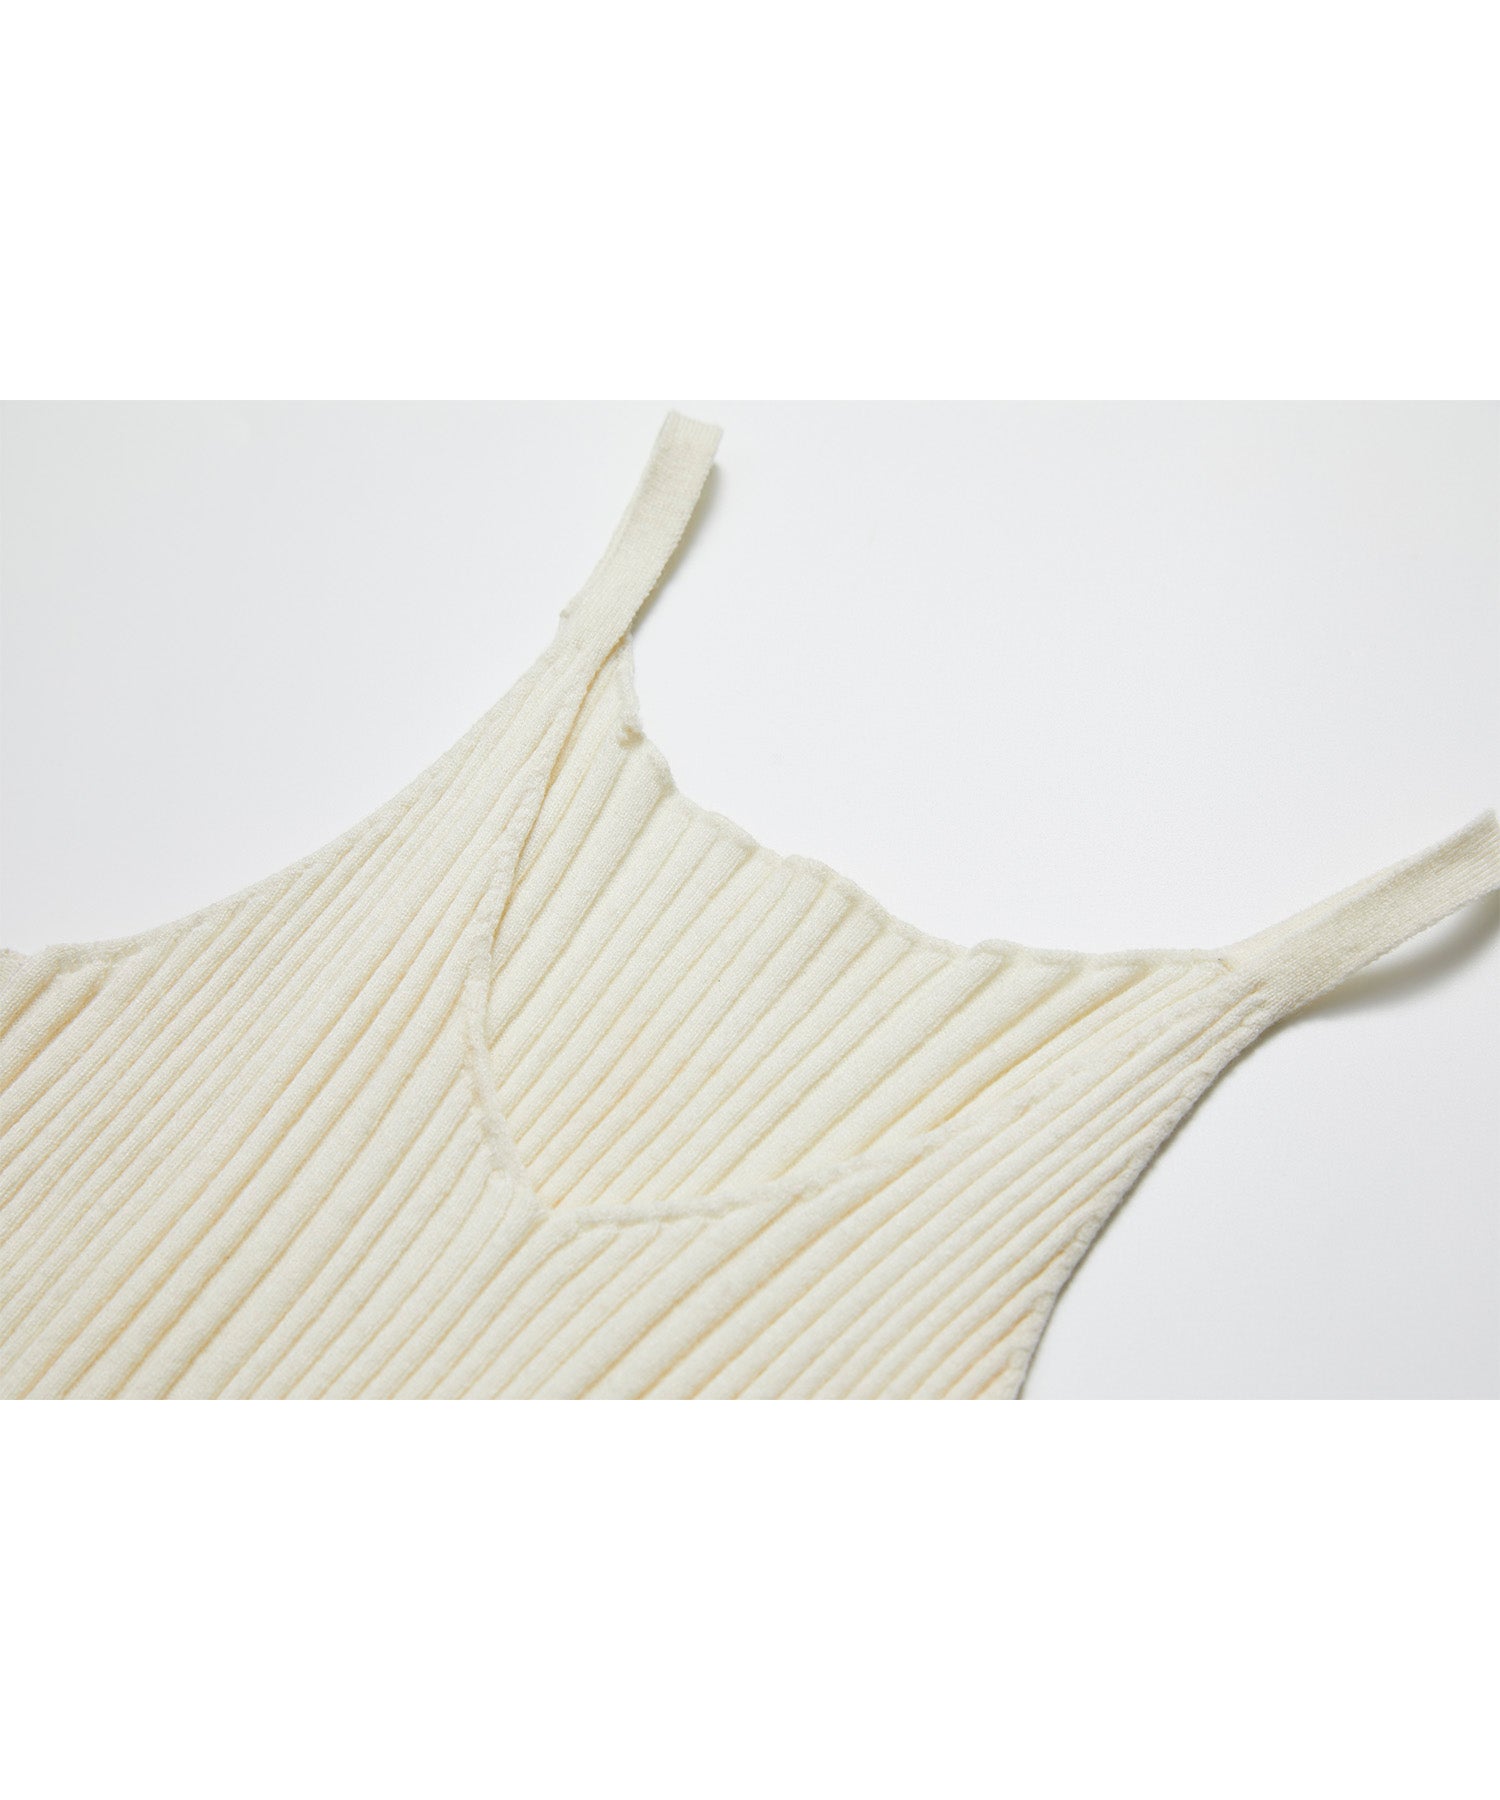 Cropped rib knit V-neck camisole / short length / tank top 